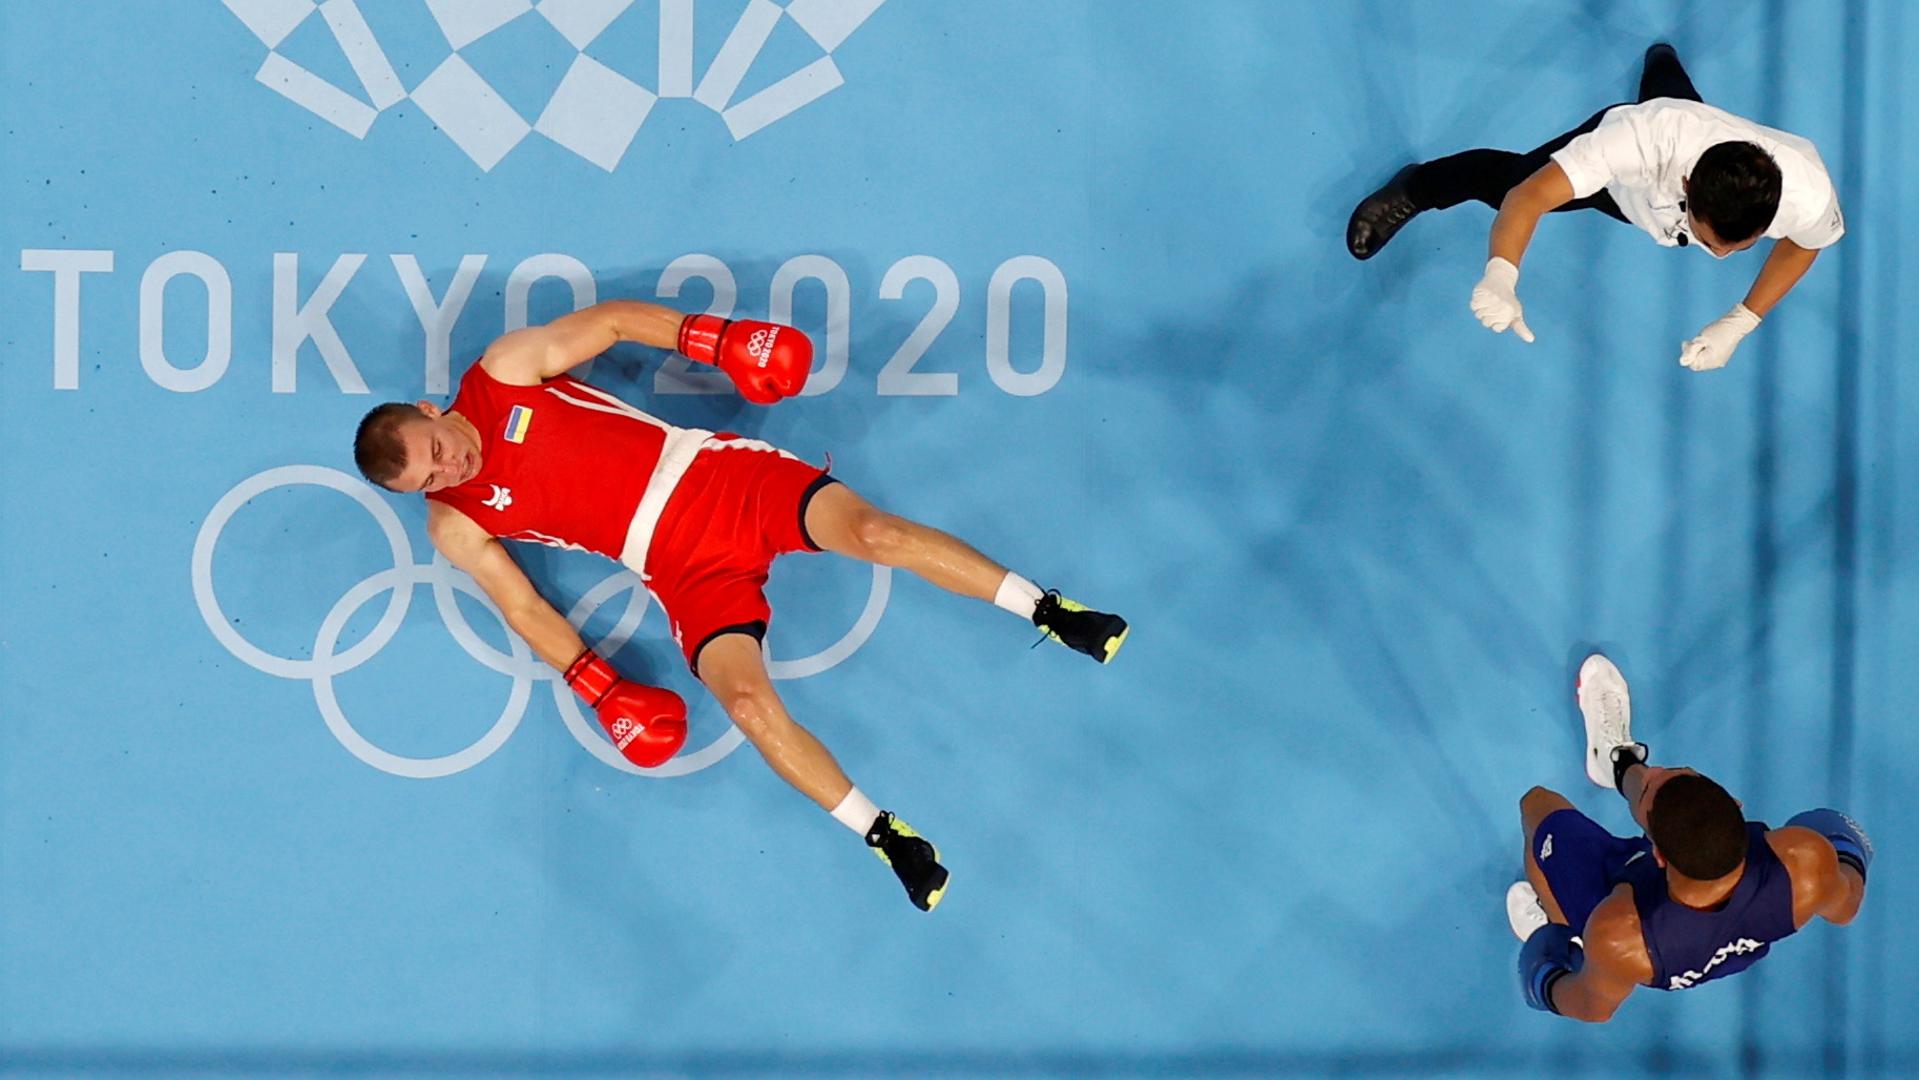 Boxing - Men's Middleweight - Final Tokyo 2020 Olympics - Boxing - Men's Middleweight - Final - Kokugikan Arena - Tokyo, Japan - August 7, 2021. Oleksandr Khyzhniak of Ukraine lies on the ground after being knocked down during his fight against Hebert Sousa of Brazil REUTERS/Ueslei Marcelino UESLEI MARCELINO